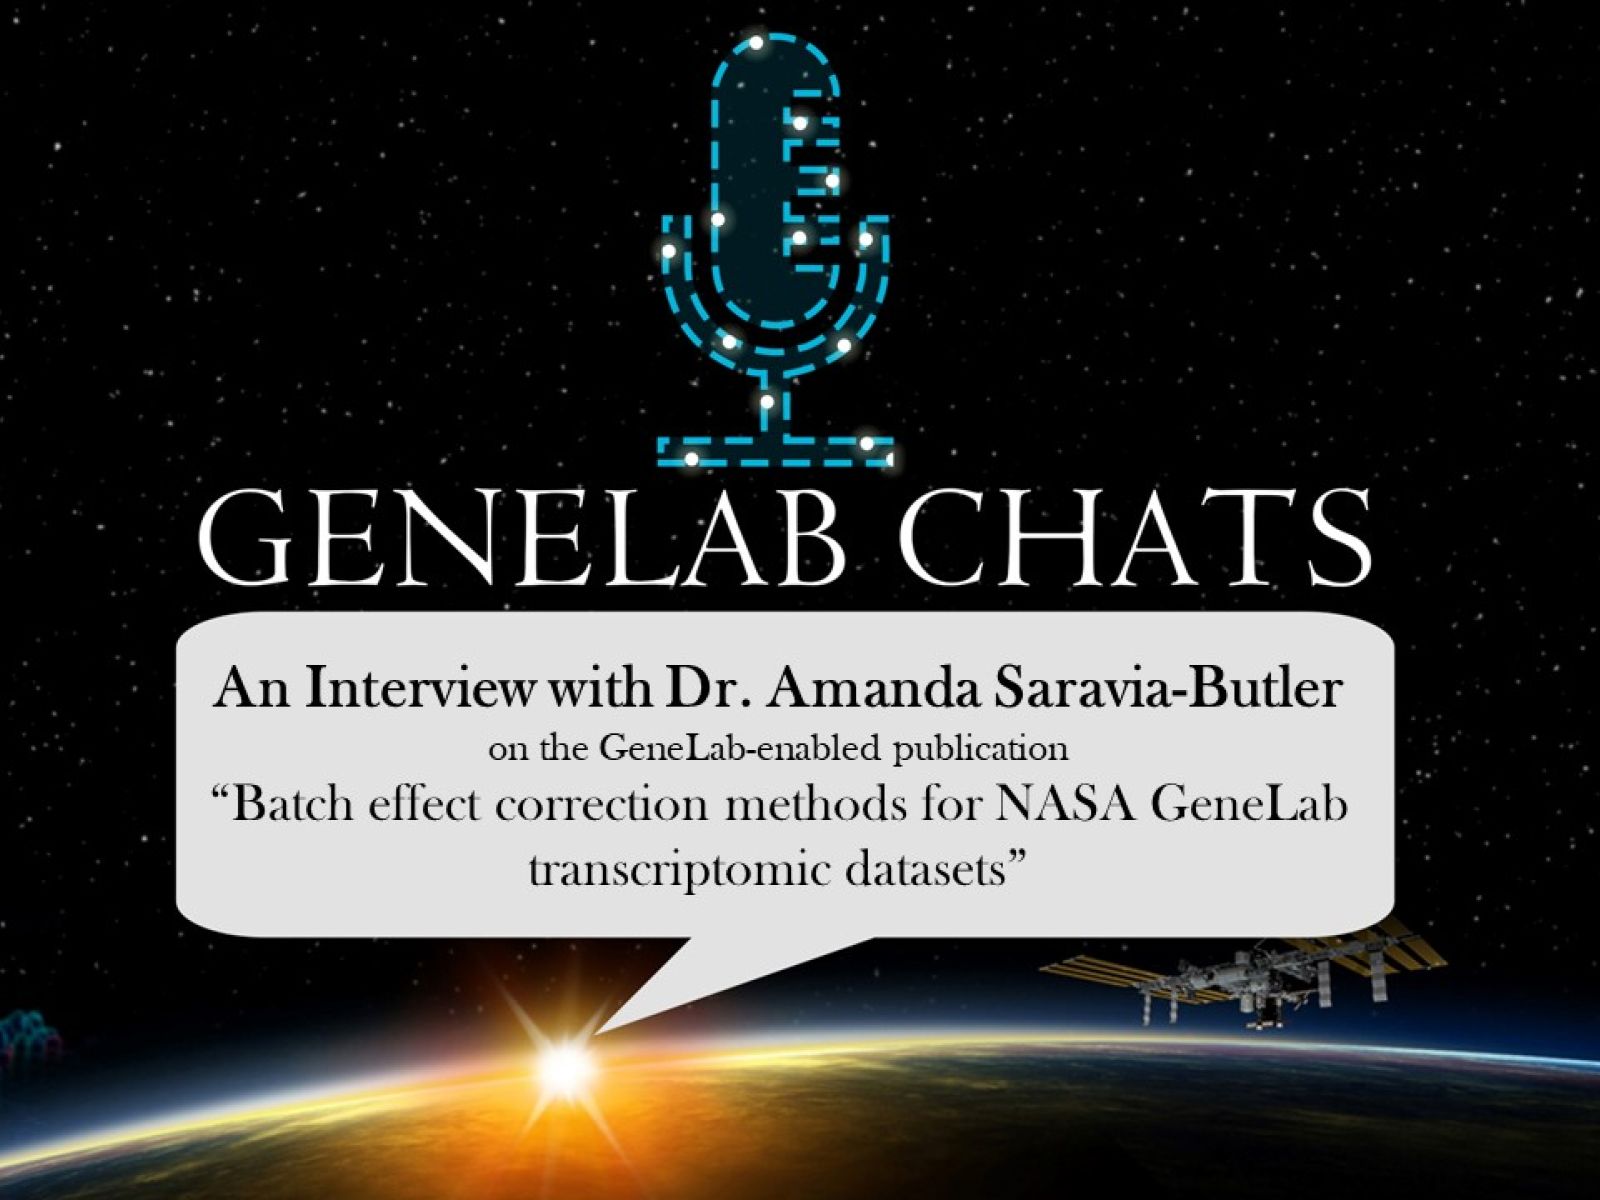 Title Slide for GeneLab Chats with Dr Amanda Saravia-Butler